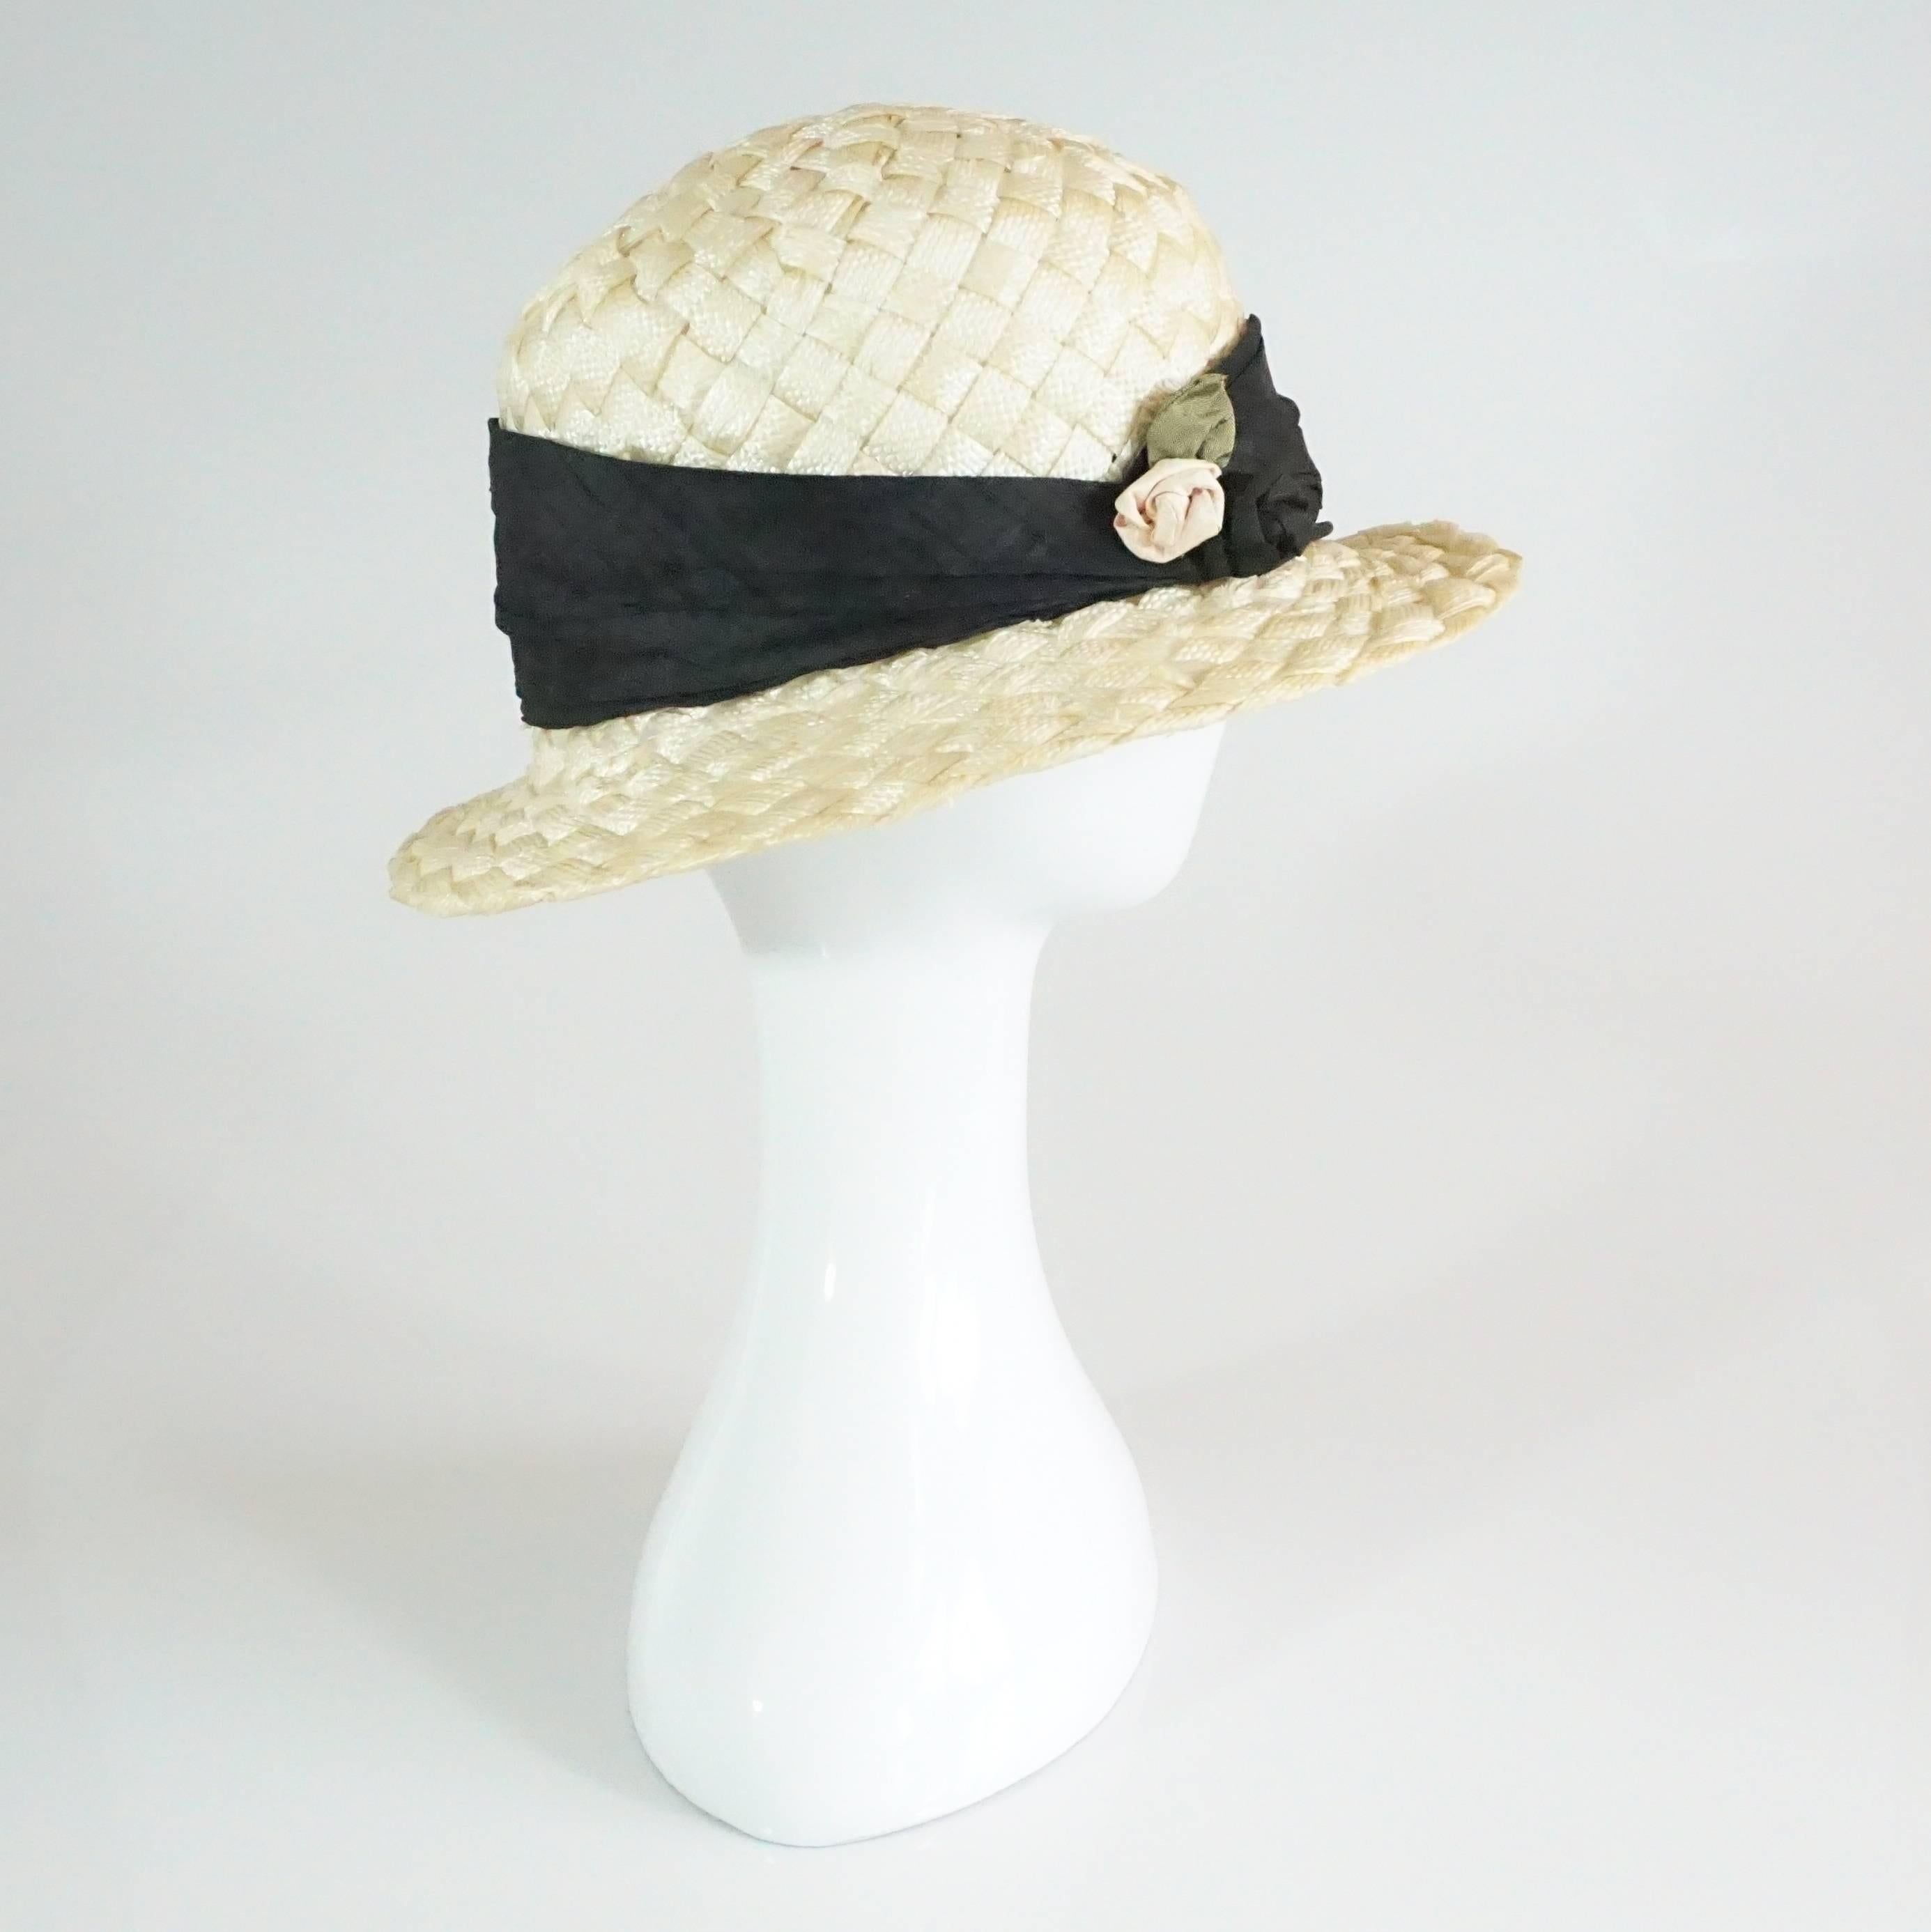 Suzanne Couture Millinery Cream Swiss Braided Straw Woven Hat w/ Black Silk Fabric Detail w/ pastel flowers. This hat is in excellent condition.
Measurements:
Inside Circumference: 21